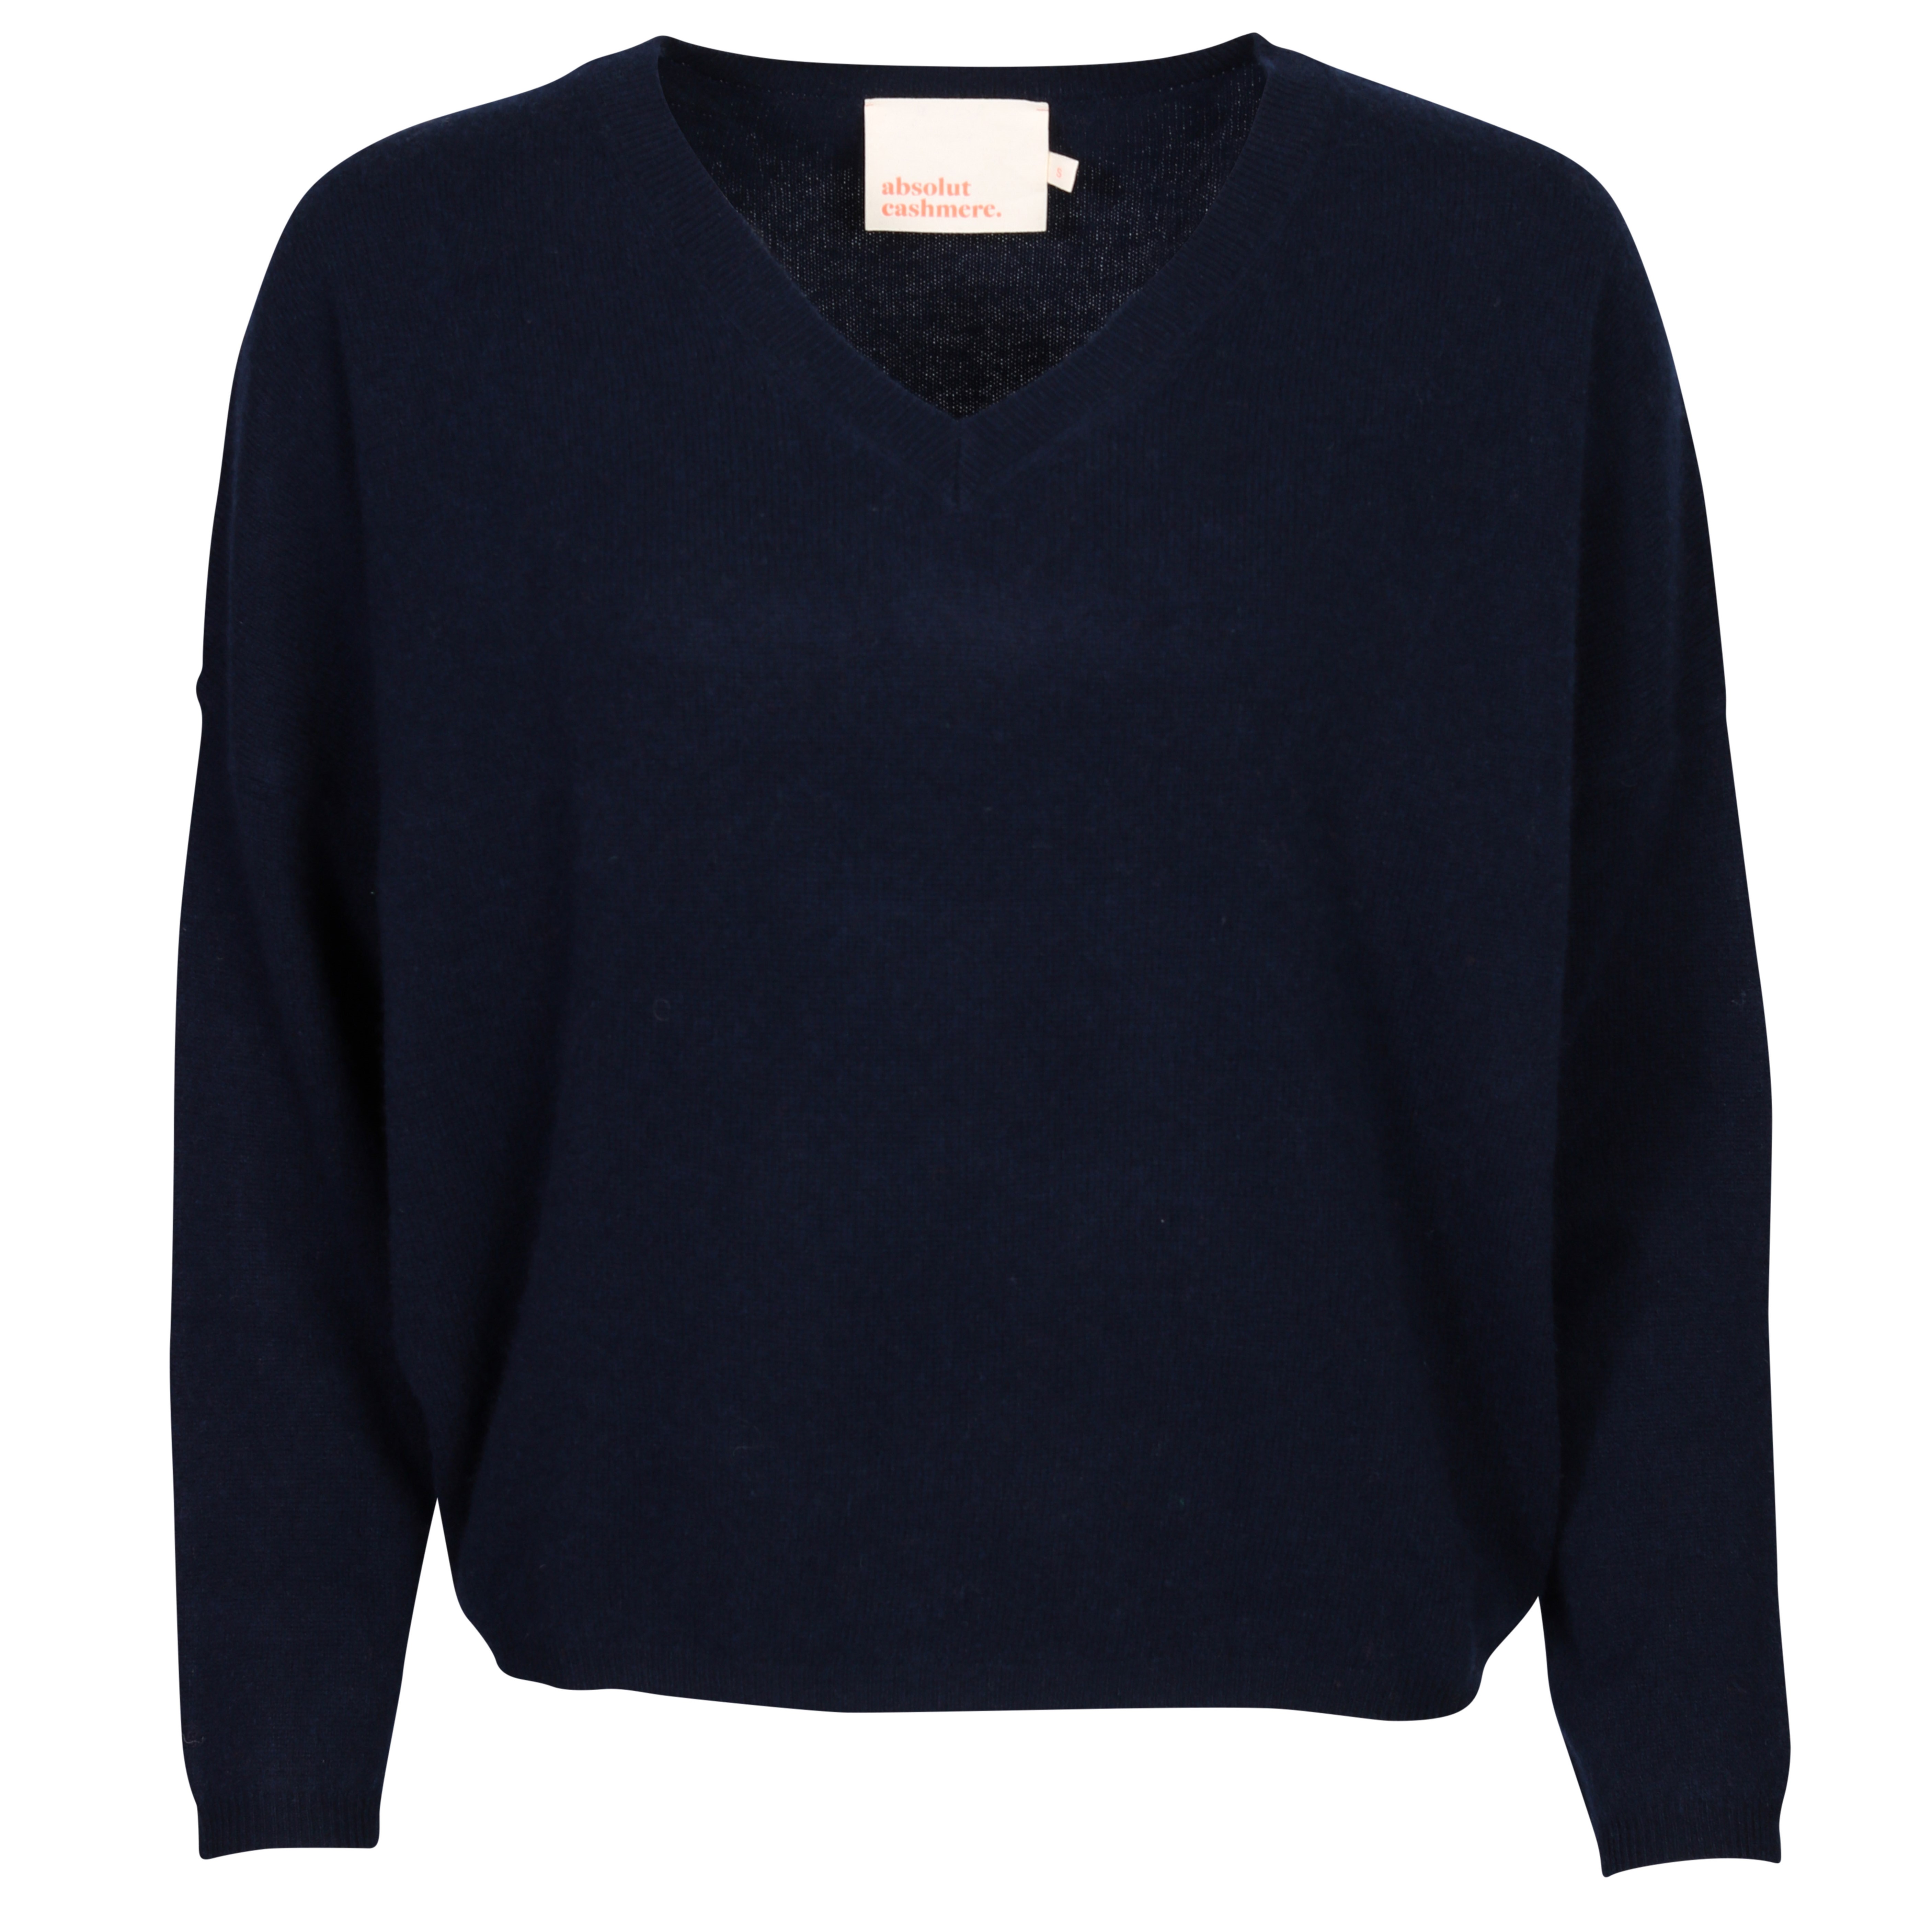 Absolut Cashmere Alicia Pullover in Nuit L